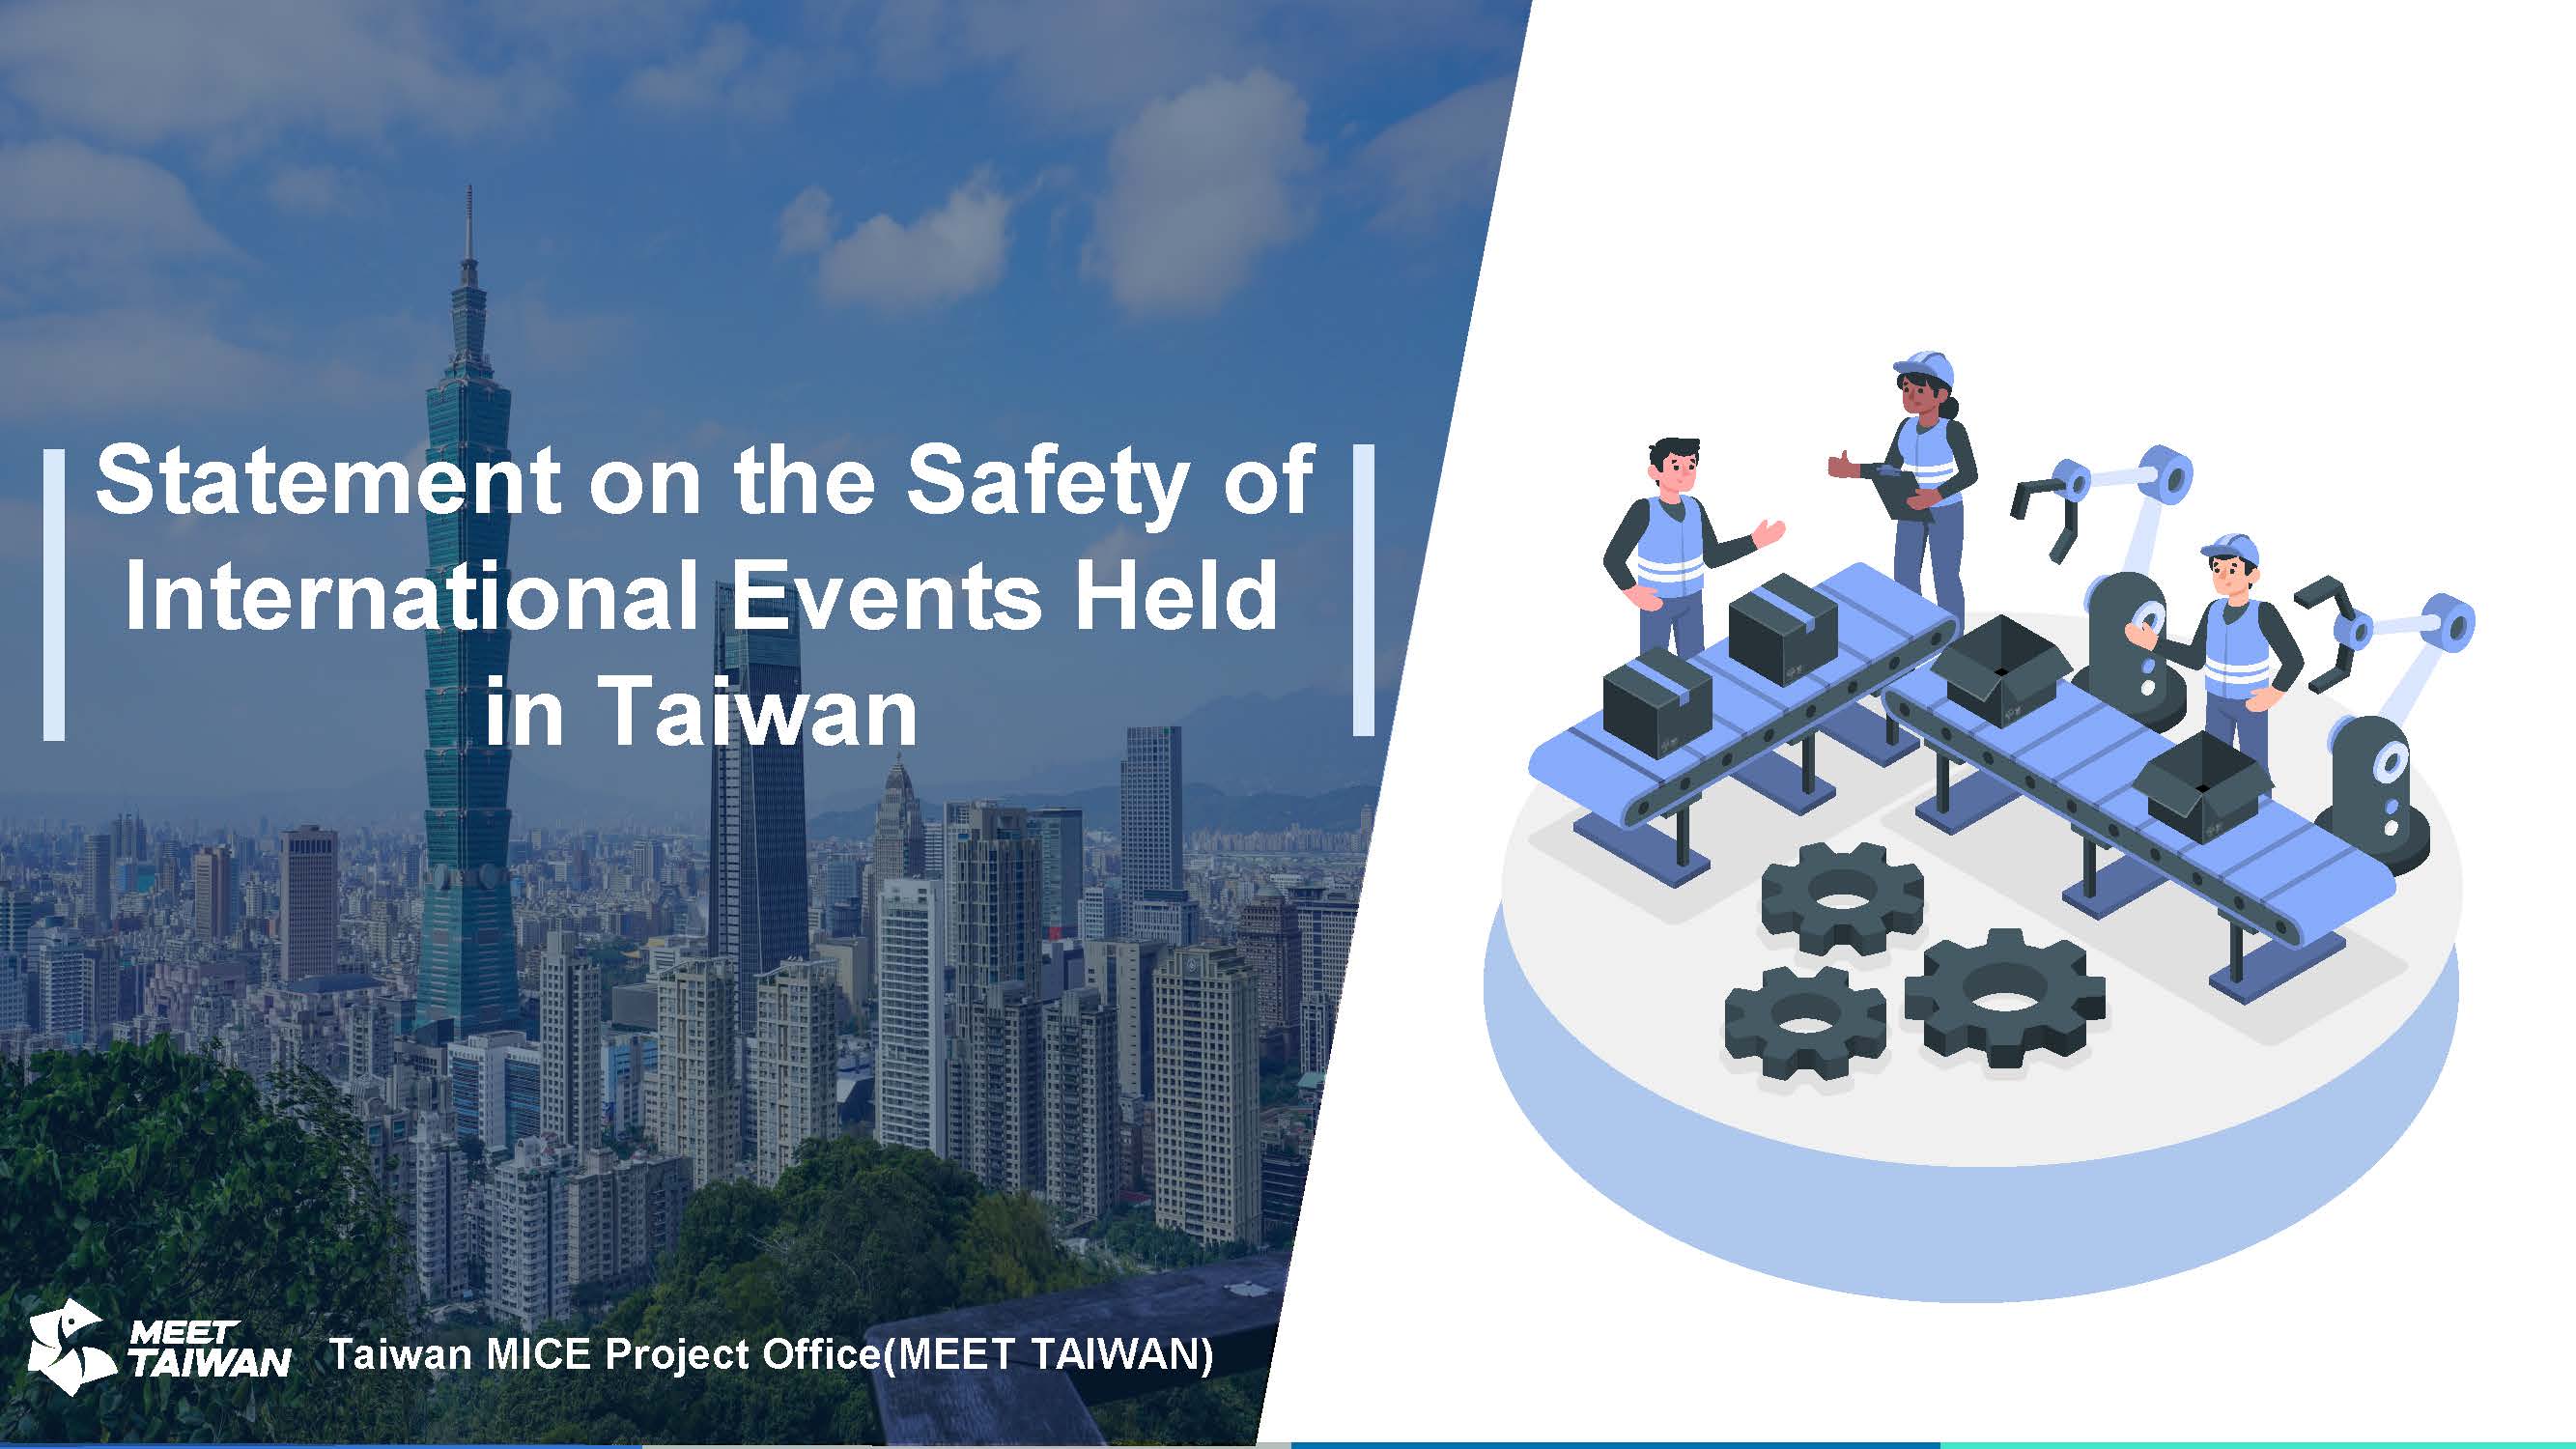 Statement on the Safety of International Events Held in Taiwan (PPT)_01.jpg